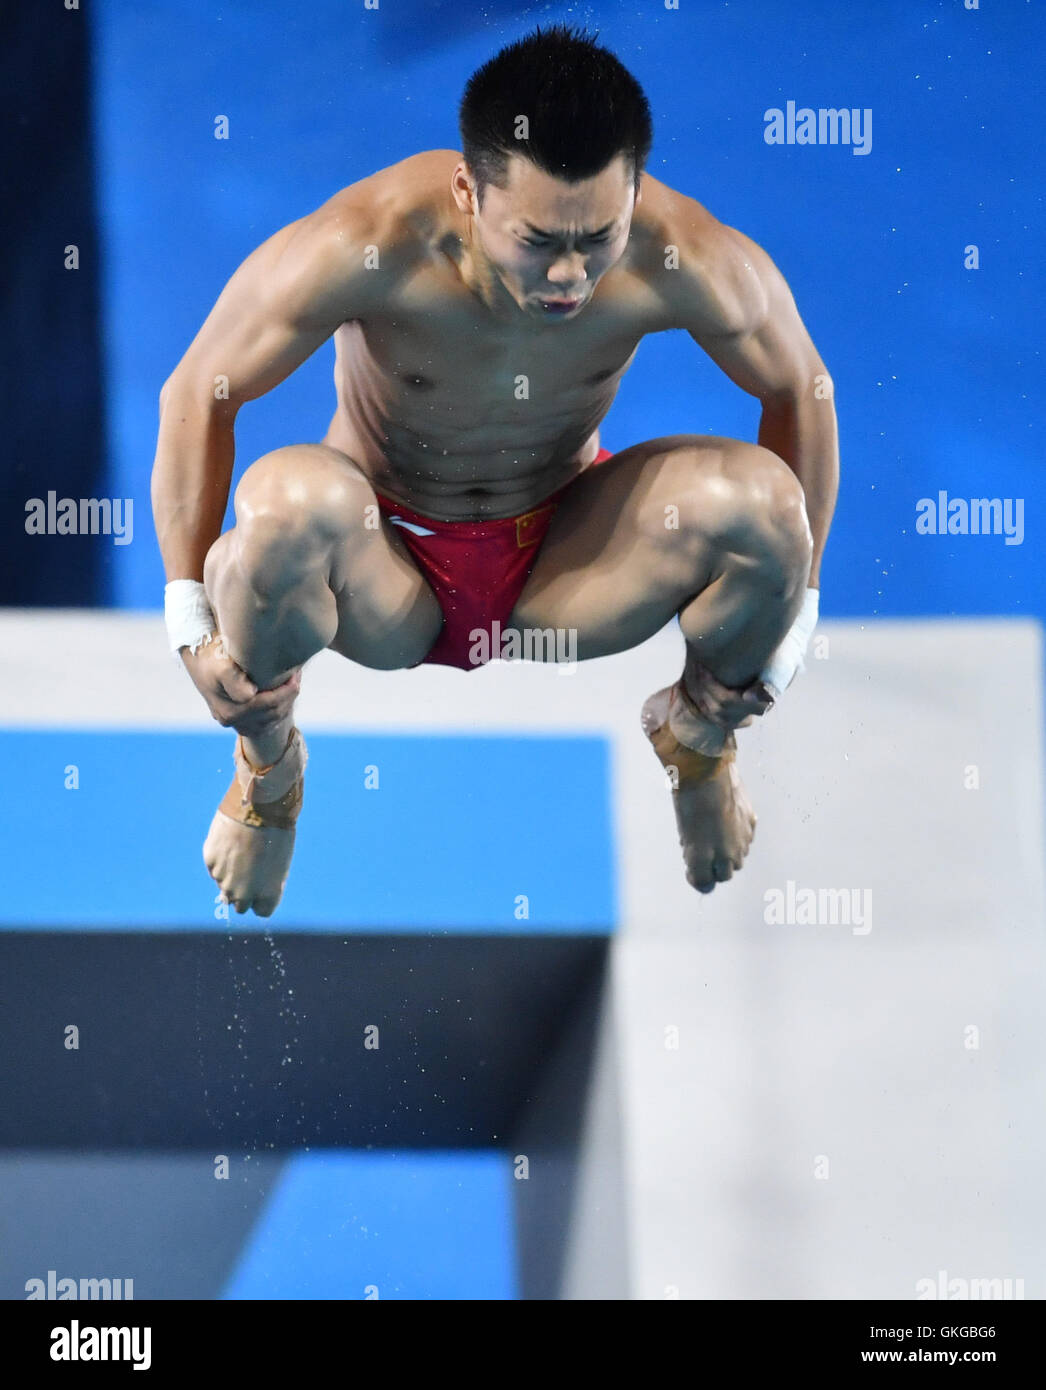 Rio de Janeiro, Brazil. 20th Aug, 2016. Gold medalist Chen Aisen of China in action during the Men's 10m Platform Final of the Diving event during the Rio 2016 Olympic Games at the Maria Lenk Aquatics Centre in Rio de Janeiro, Brazil, 20 August 2016. Photo: Felix Kaestle/dpa/Alamy Live News Stock Photo